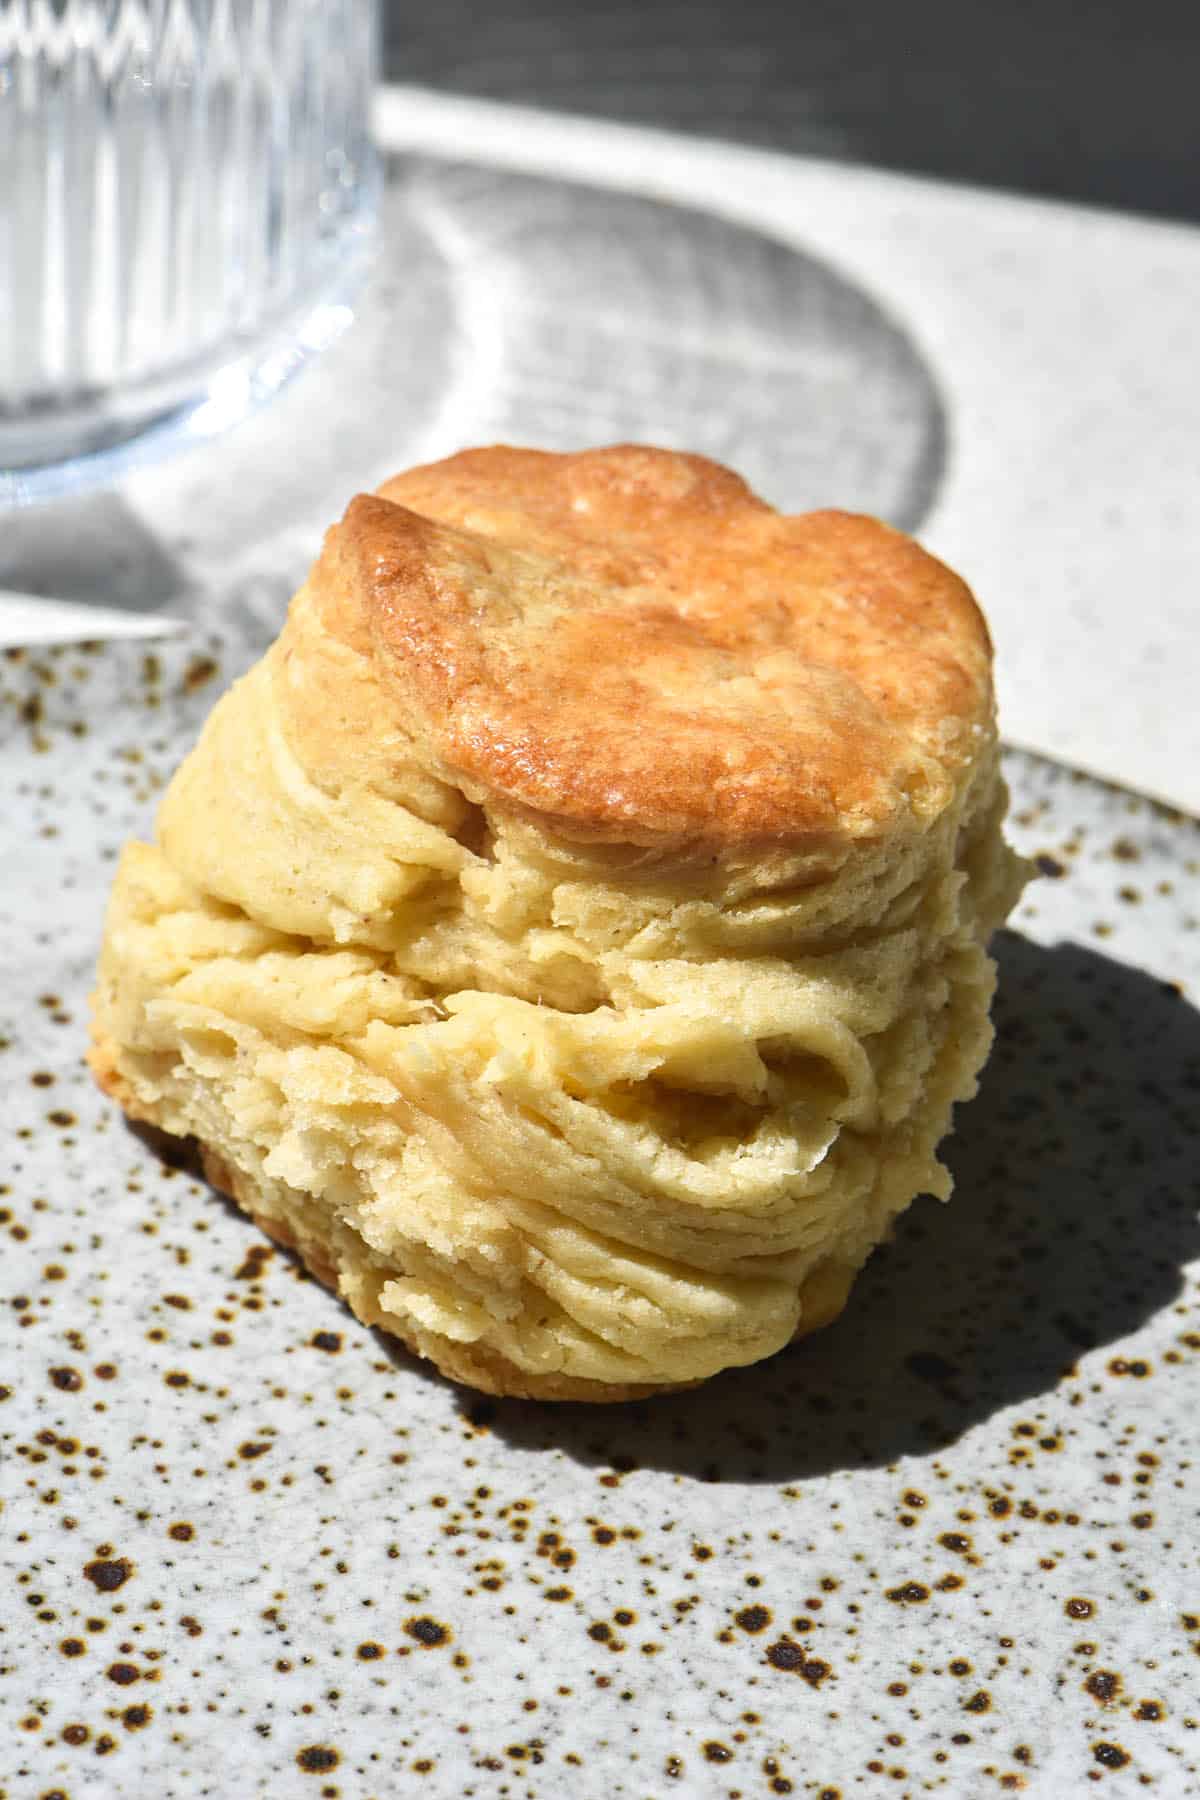 A side on view of a flaky and tall gluten free biscuit on a white speckled ceramic plate. A sunlit glass of water sits in the background.